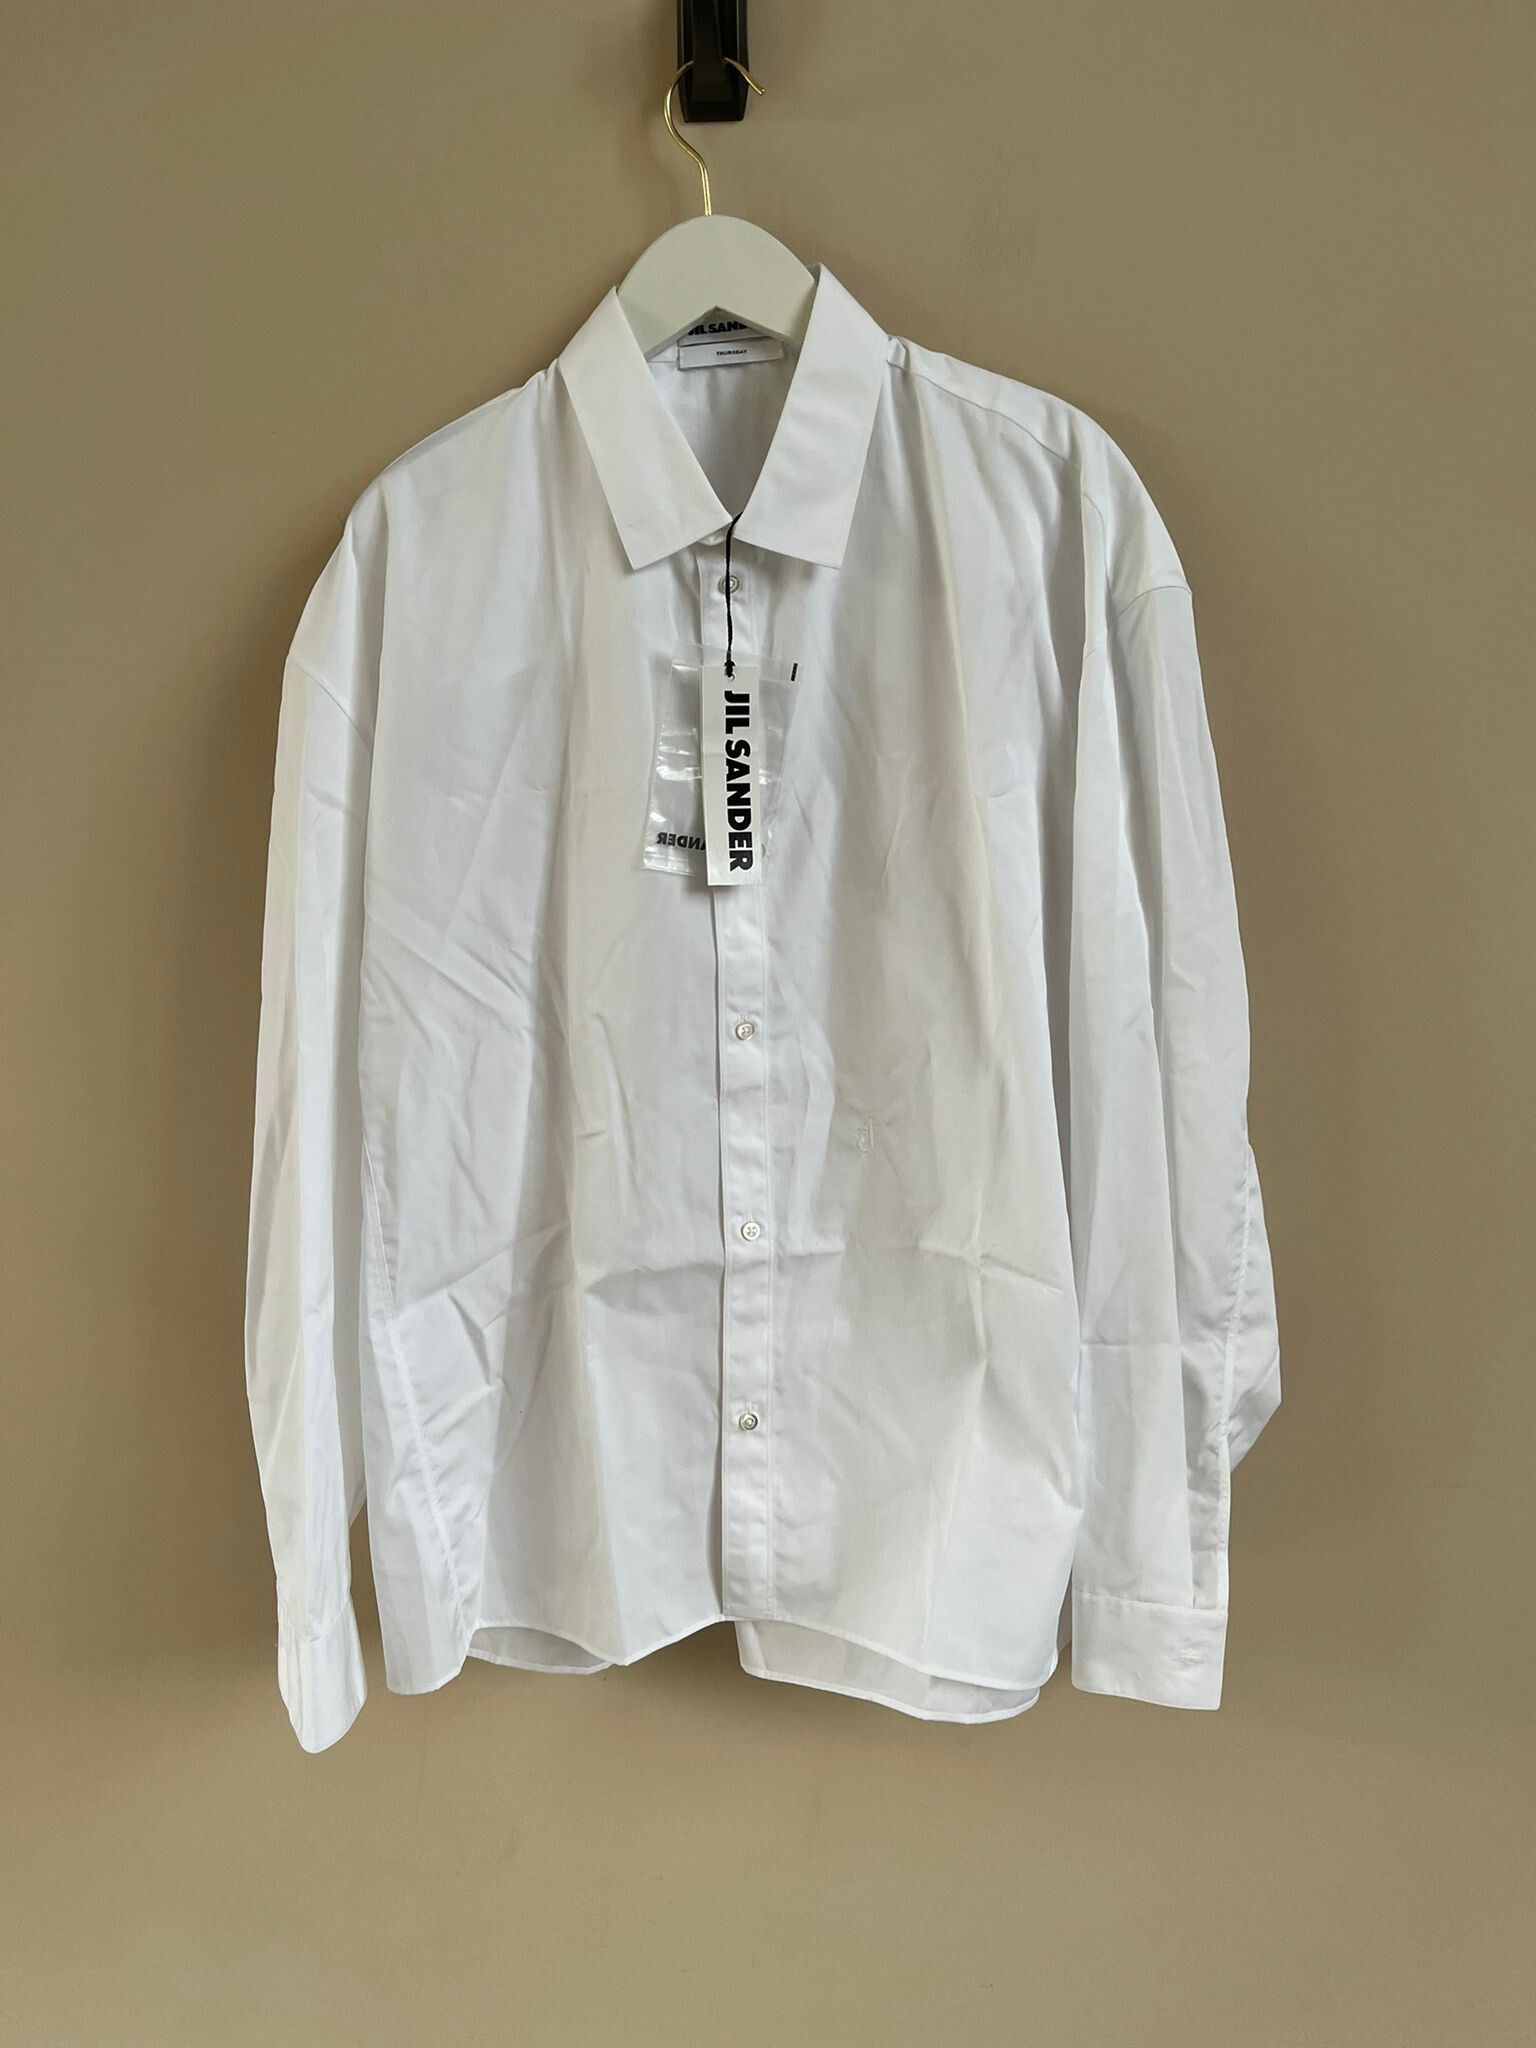 Jil Sander Embroidered Thursday Button Up in White Size US M / EU 48-50 / 2 - 1 Preview